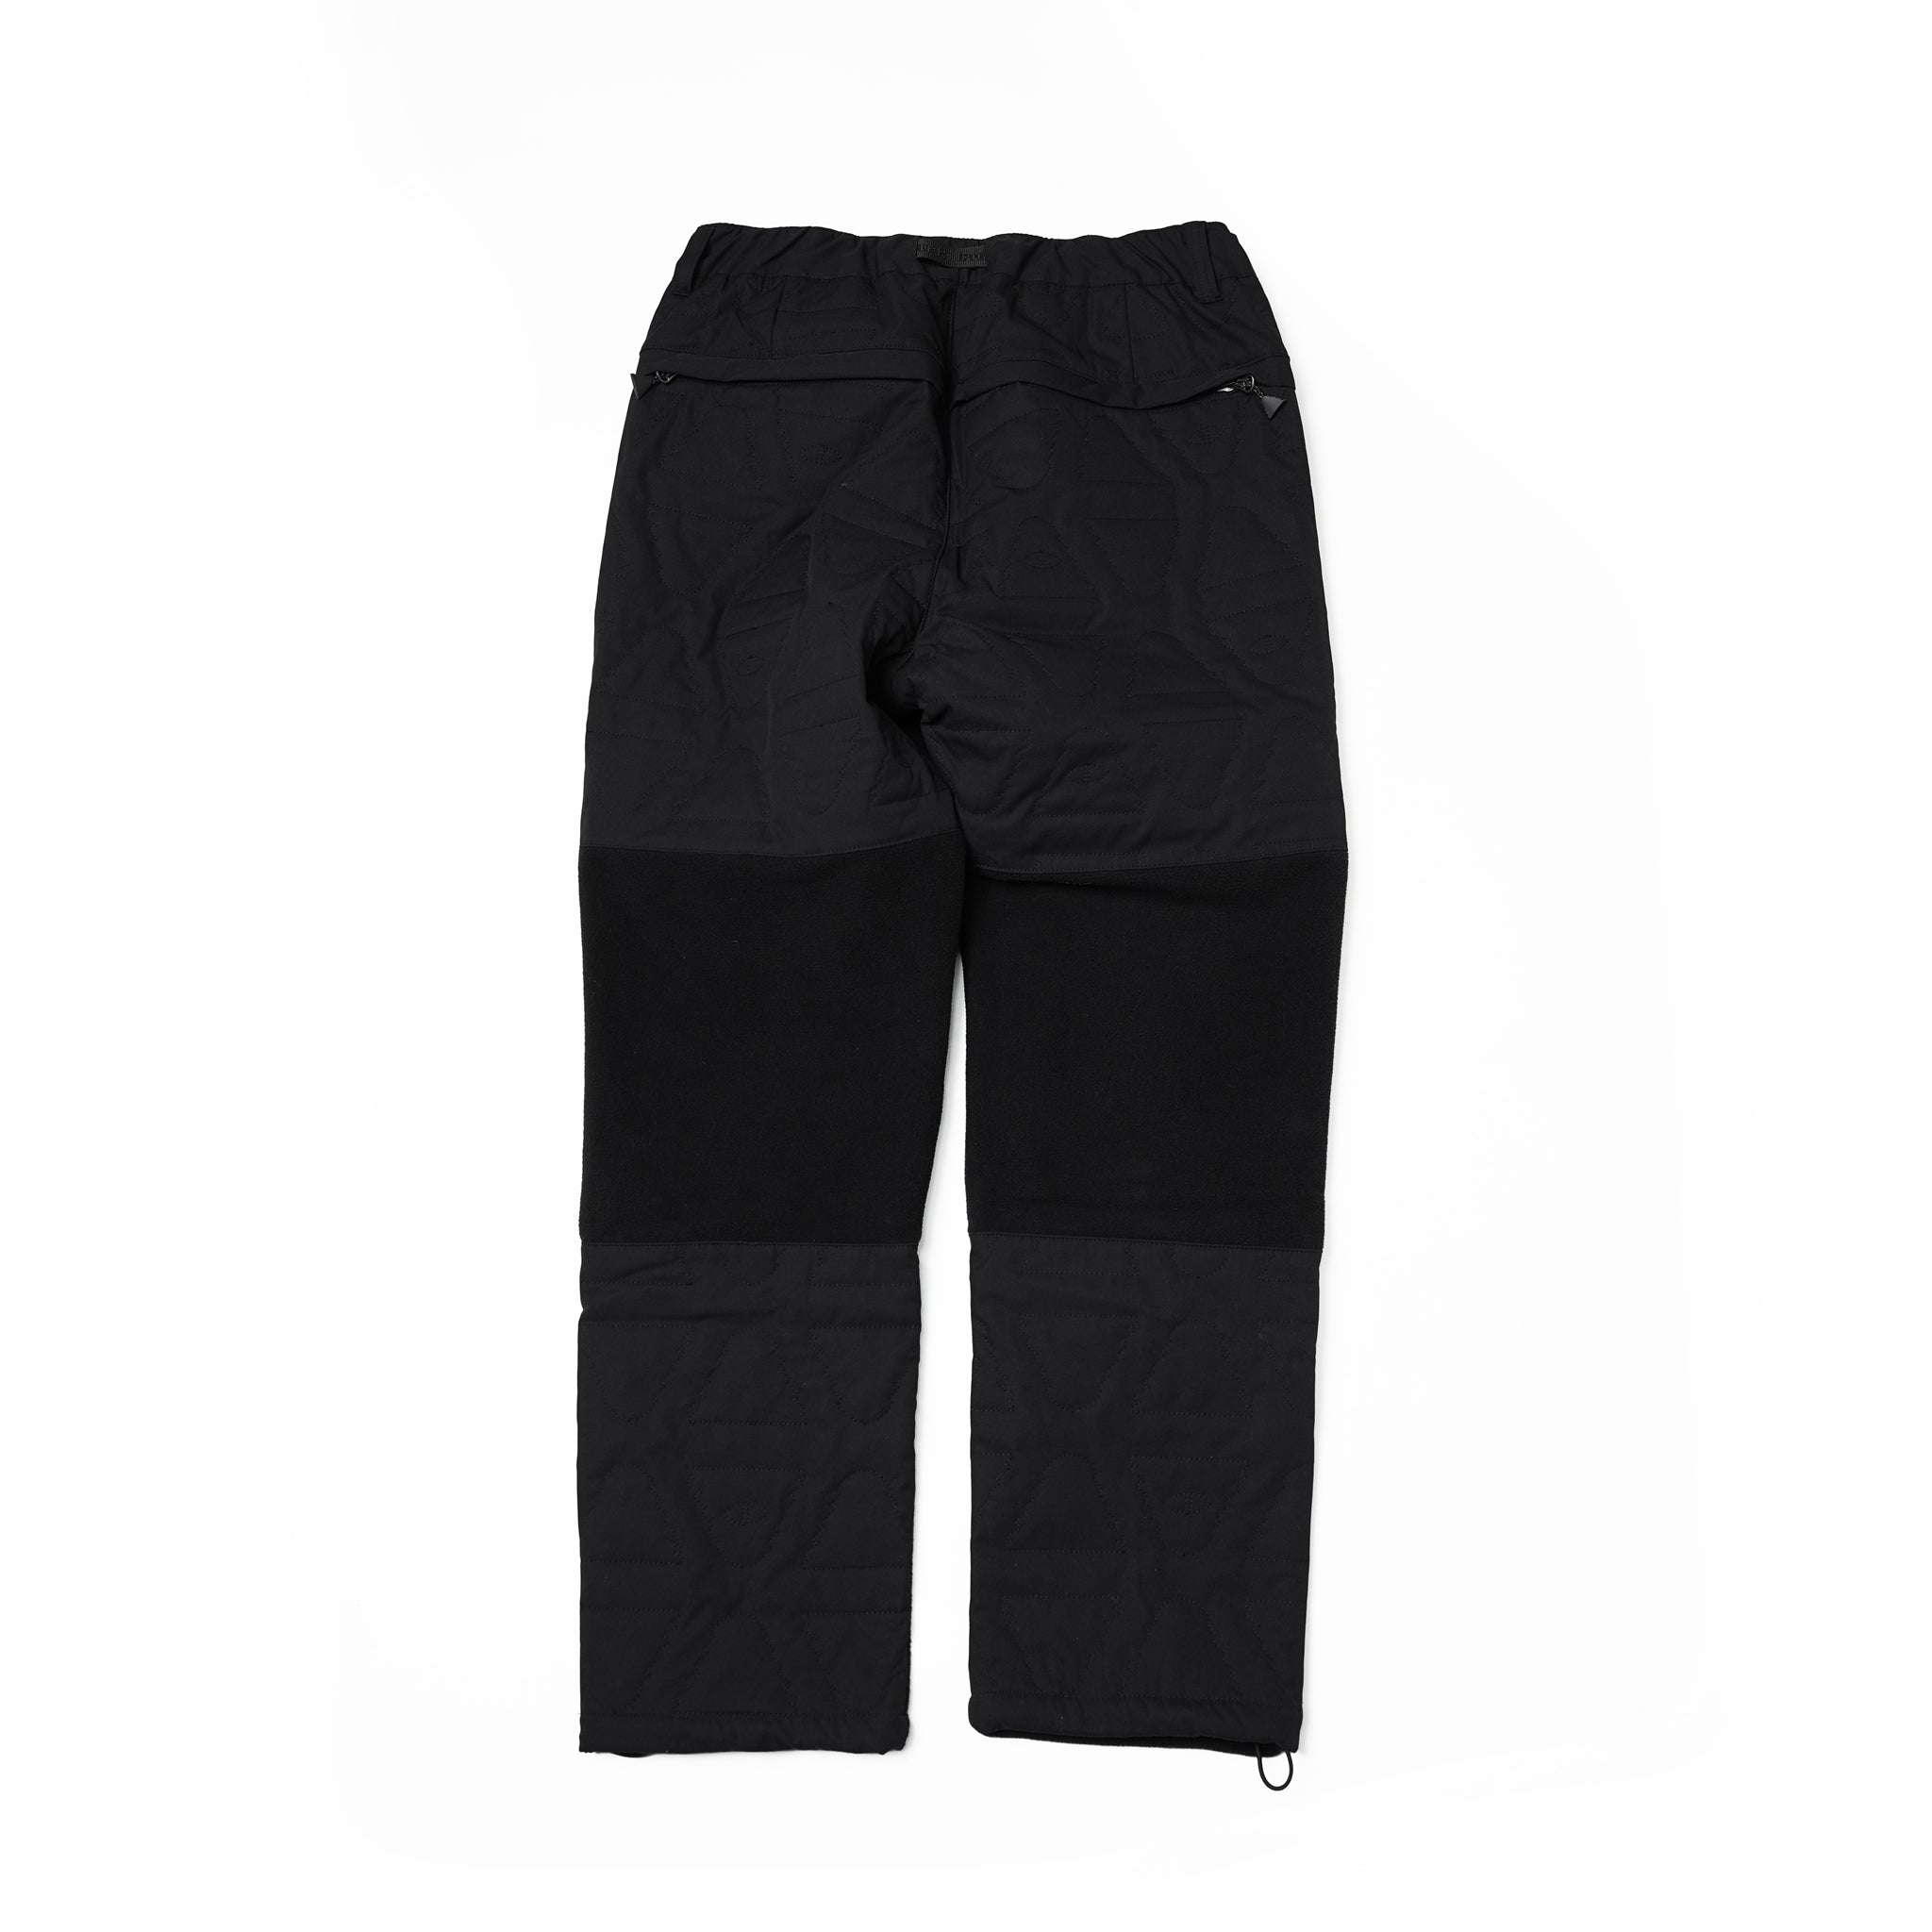 No:pd202307 | Name:CYCLOPS QUILTED PANTS | Color:Black【POLER_ポーラー】